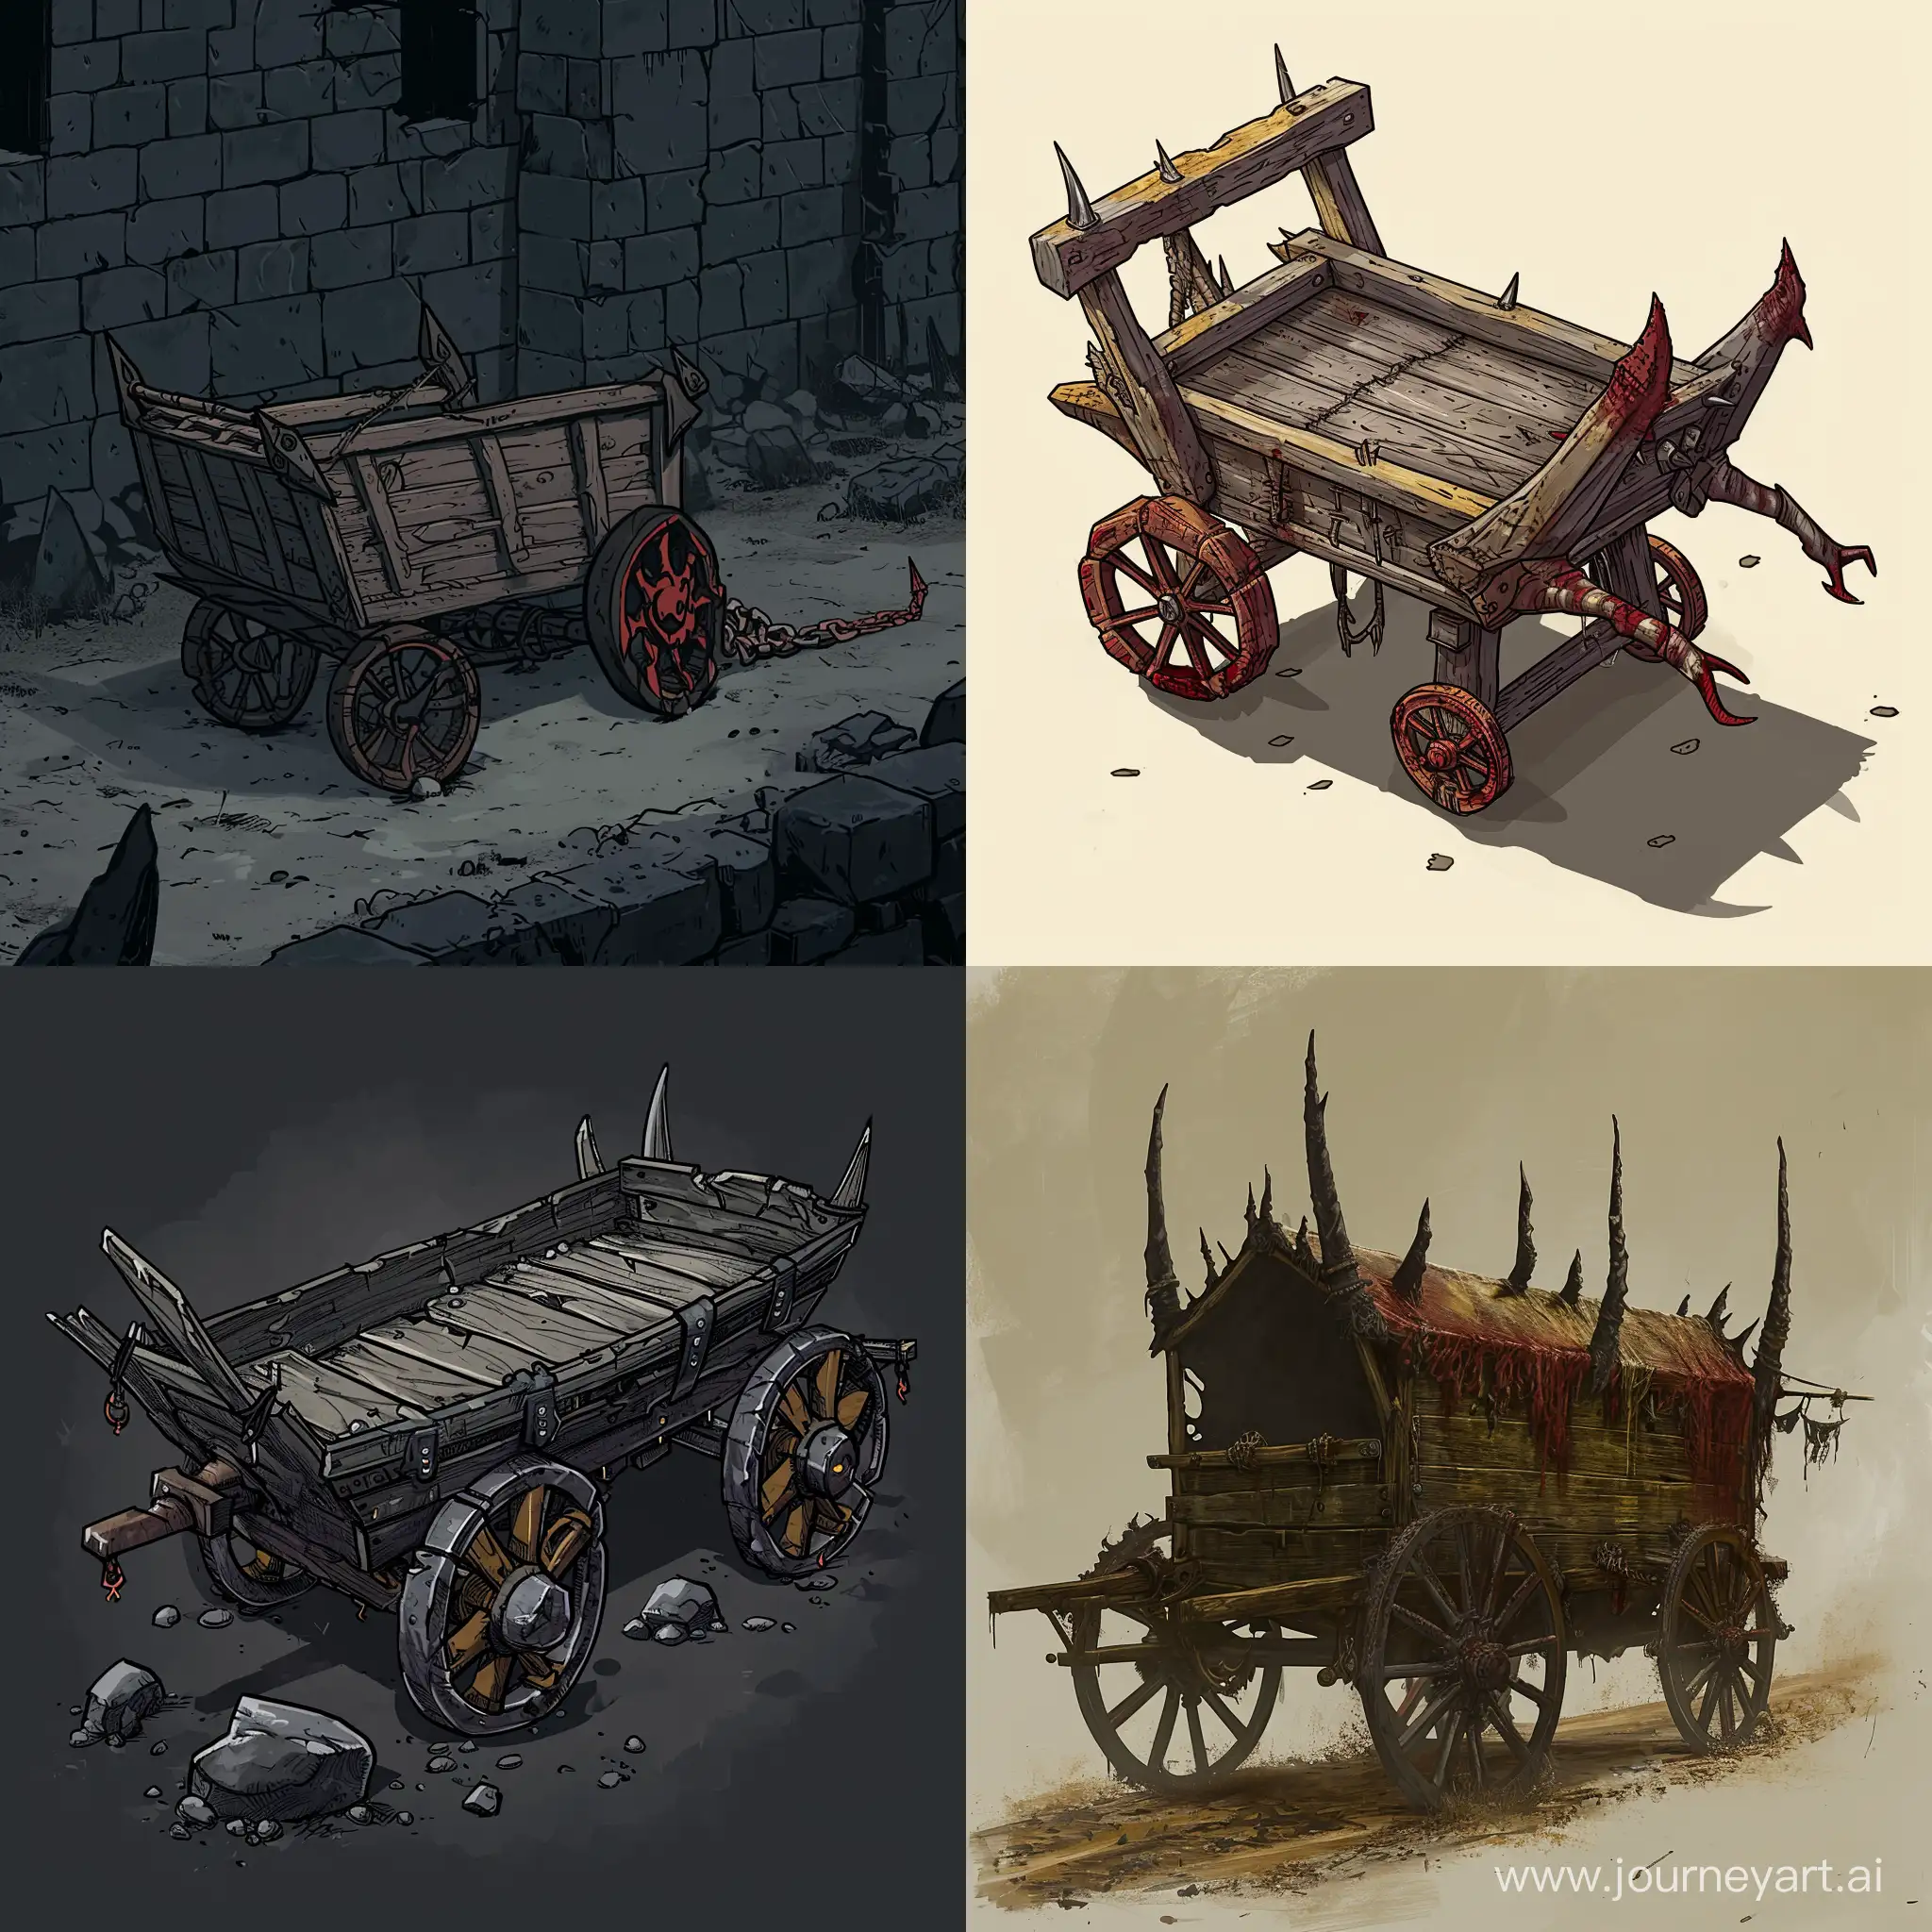 in inkarnate like stamp asset style give me a image of a cart that demons would drag
